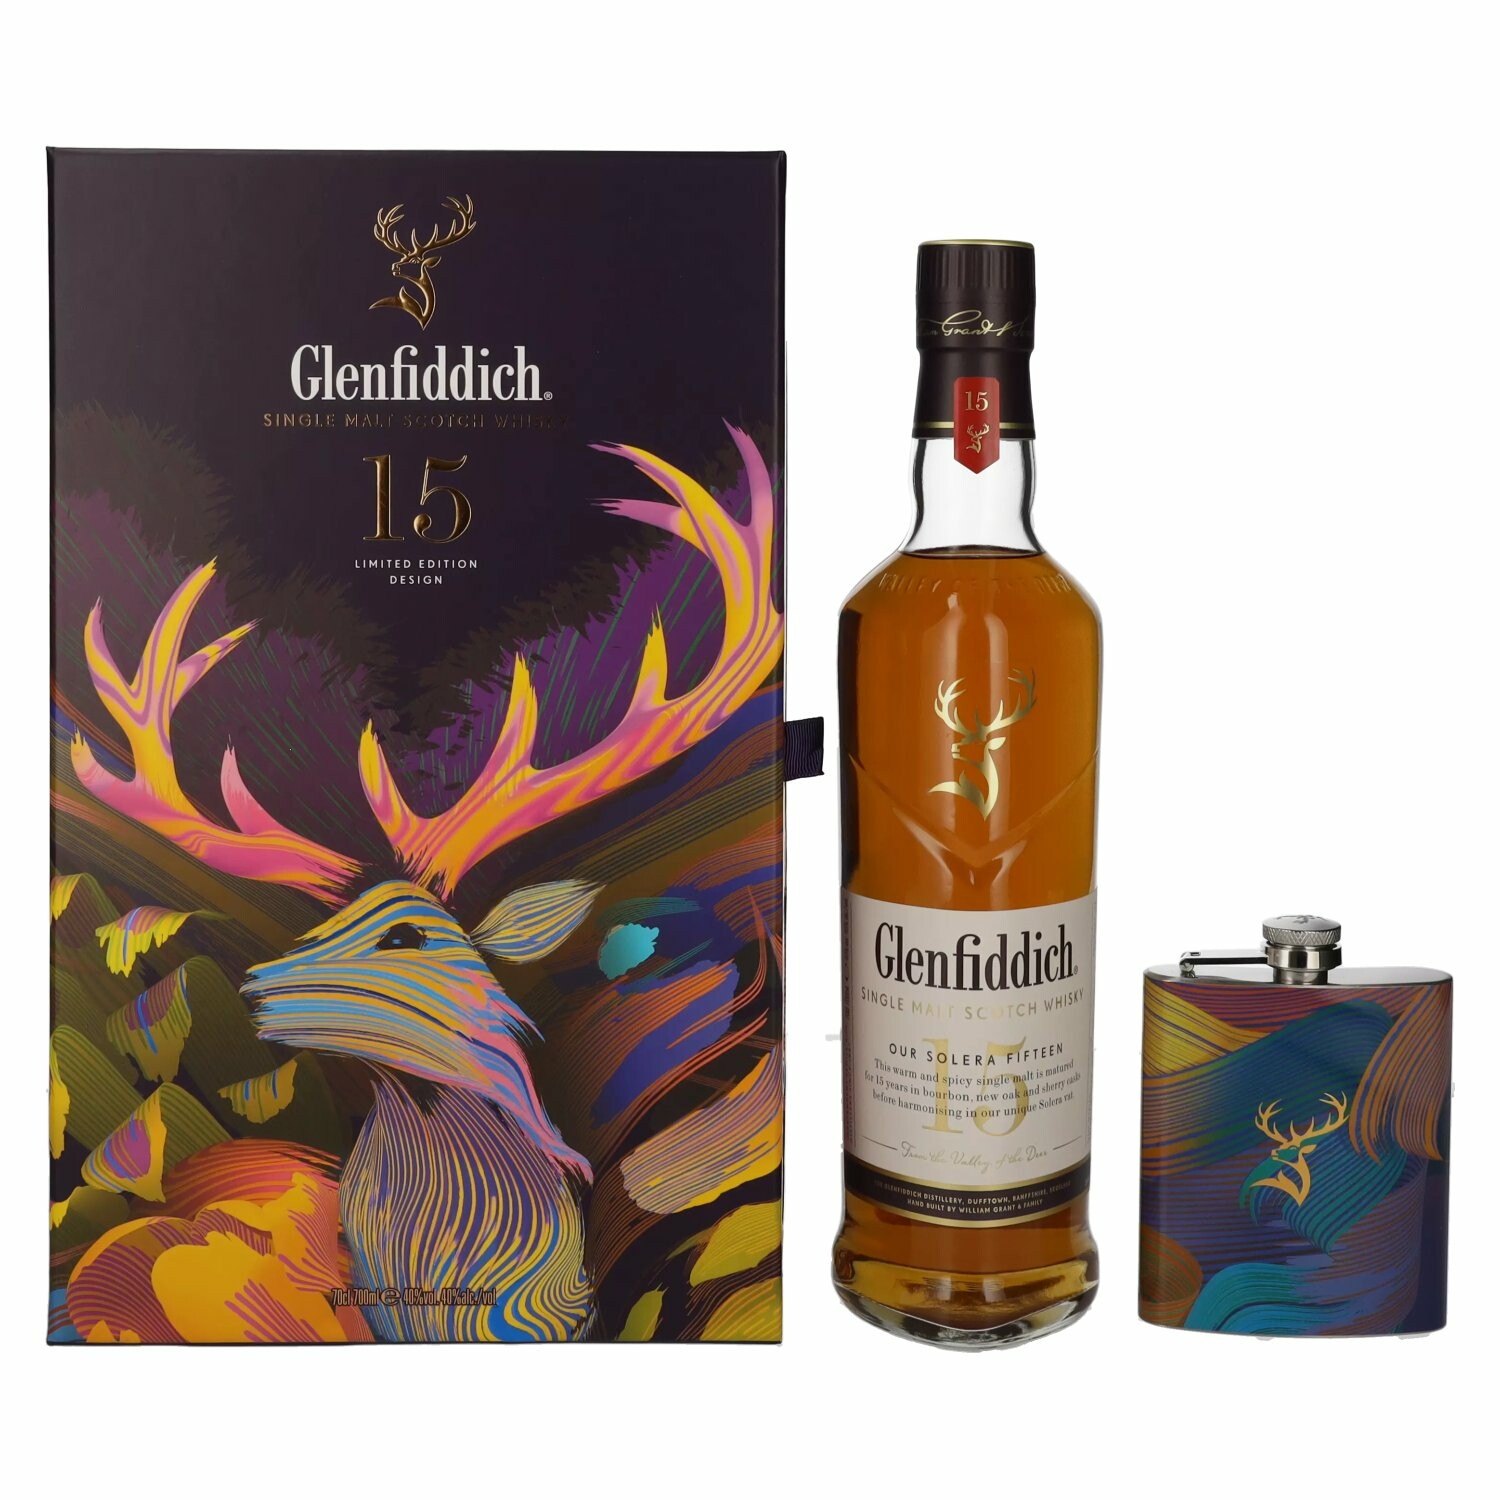 Glenfiddich 15 Years Old OUR SOLERA 40% Vol. 0,7l in Giftbox with Flachmann